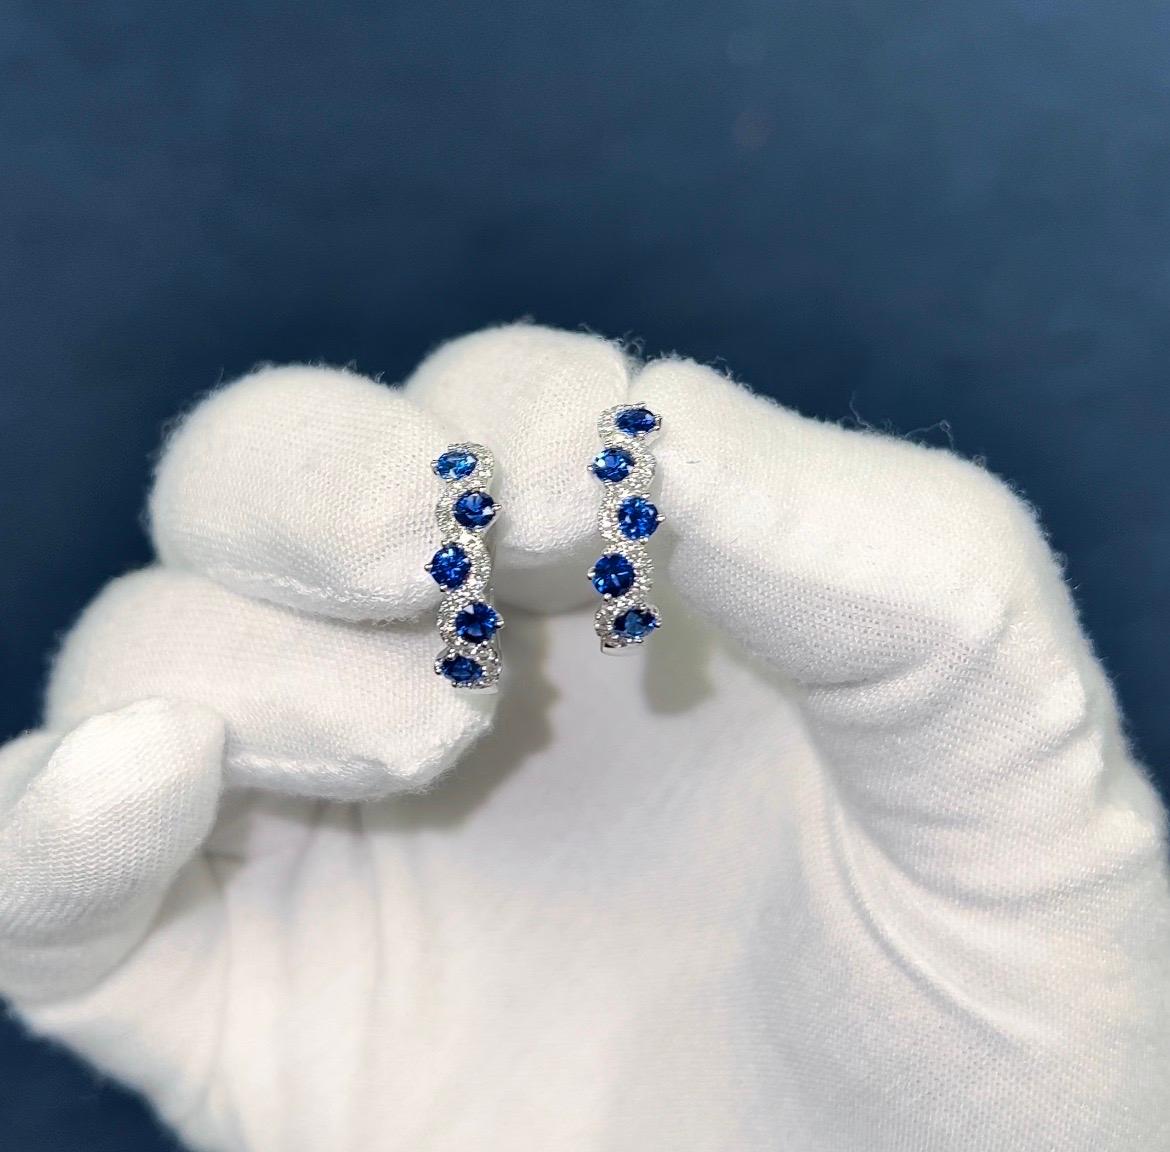 (DiamondTown) These lovely earrings each feature five round cut vivid blue sapphires (total weight 1.65 carats) inside a weaving curve of round white diamonds (diamond weight 0.33 carats).

The earrings close by lever-back and are set in 18k White